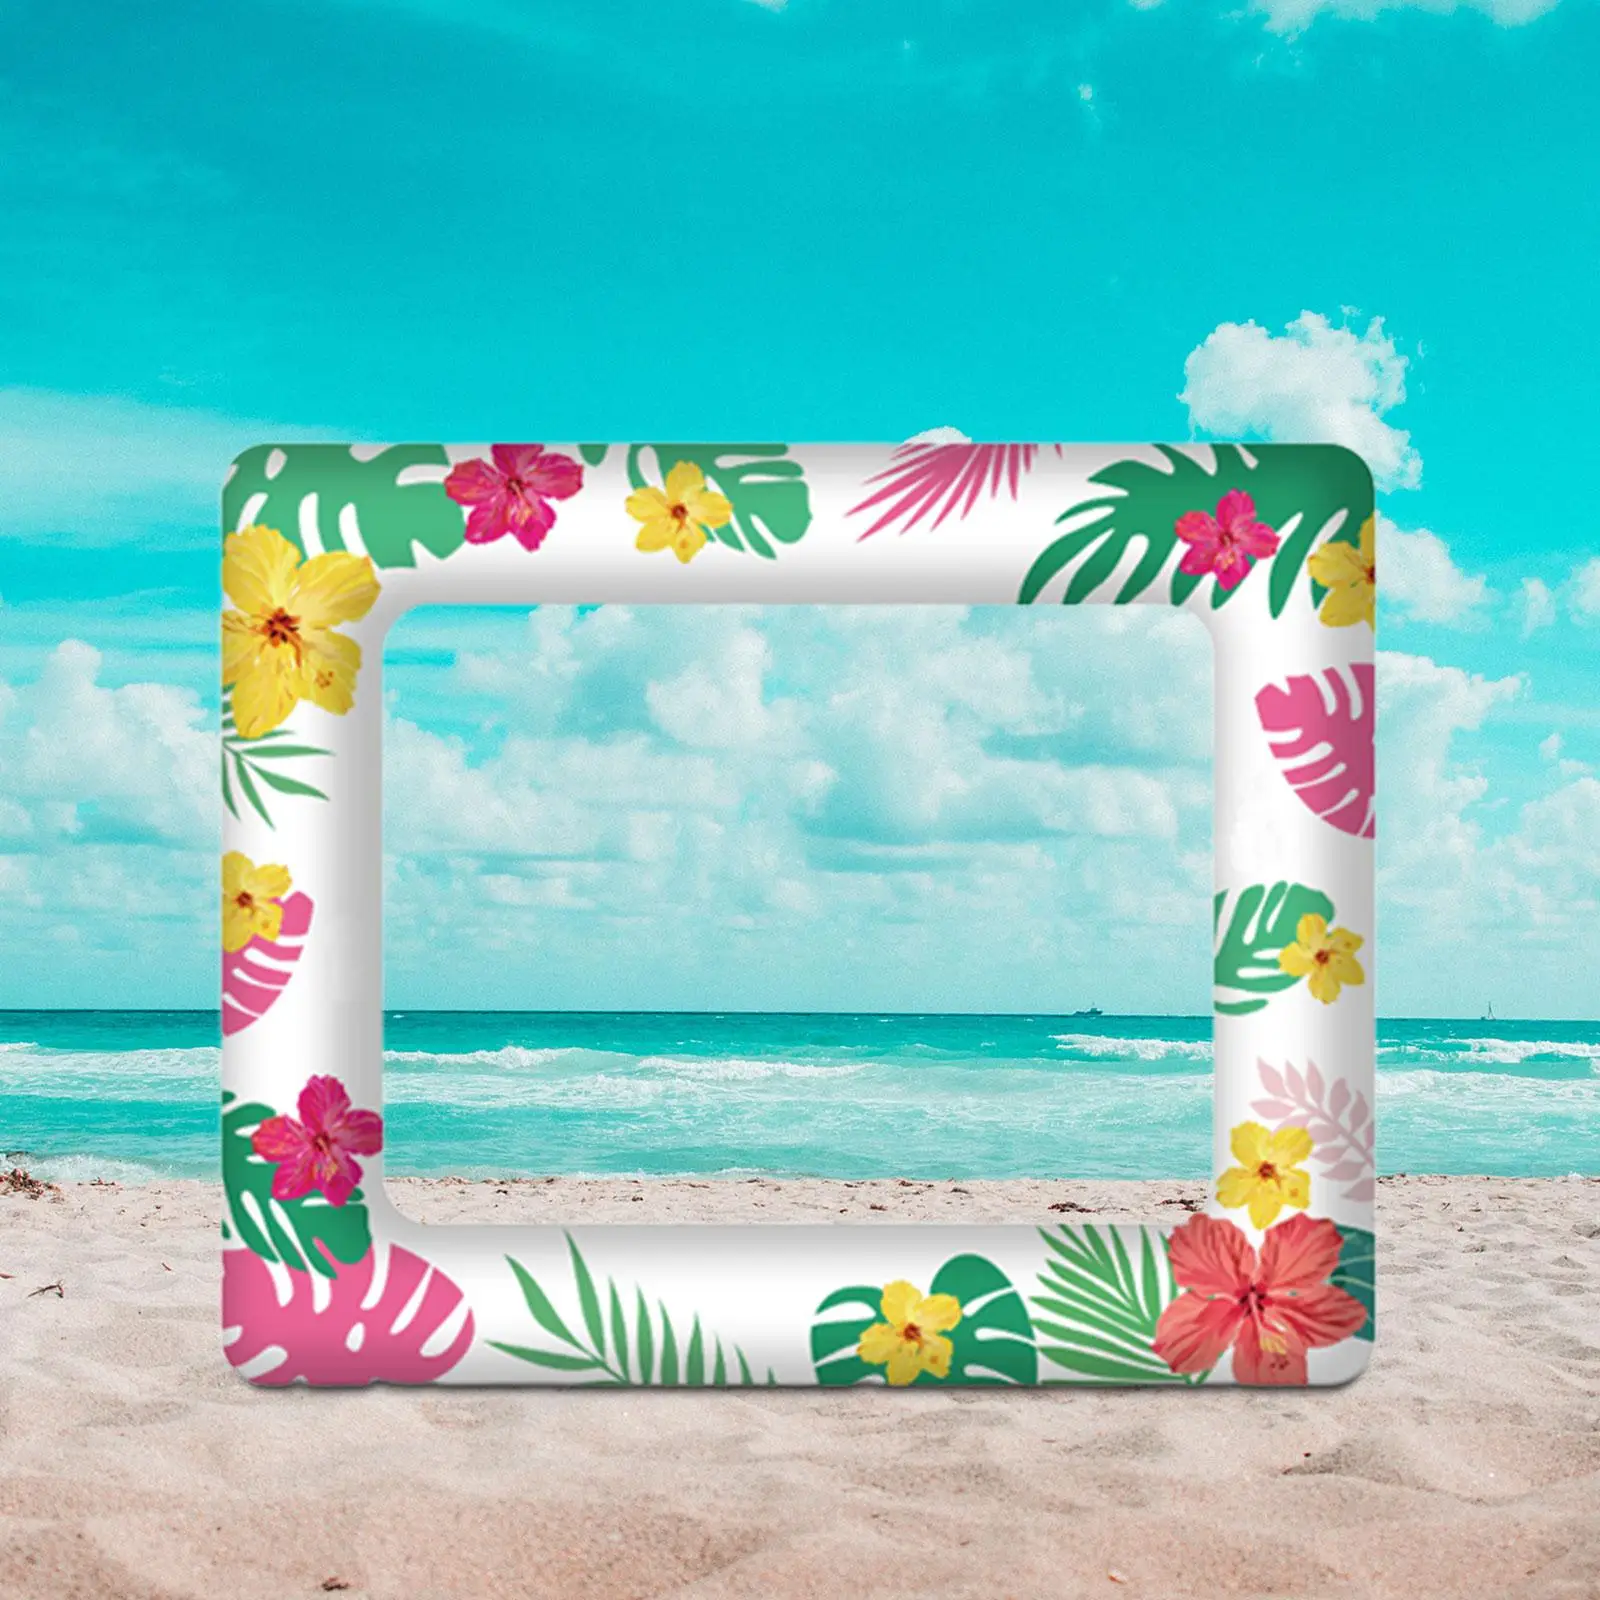 Photo Booth Props Multipurpose Lightweight Creative Hawaiian Inflatable Photo Frame for Graduation Family Holiday Carnival Party